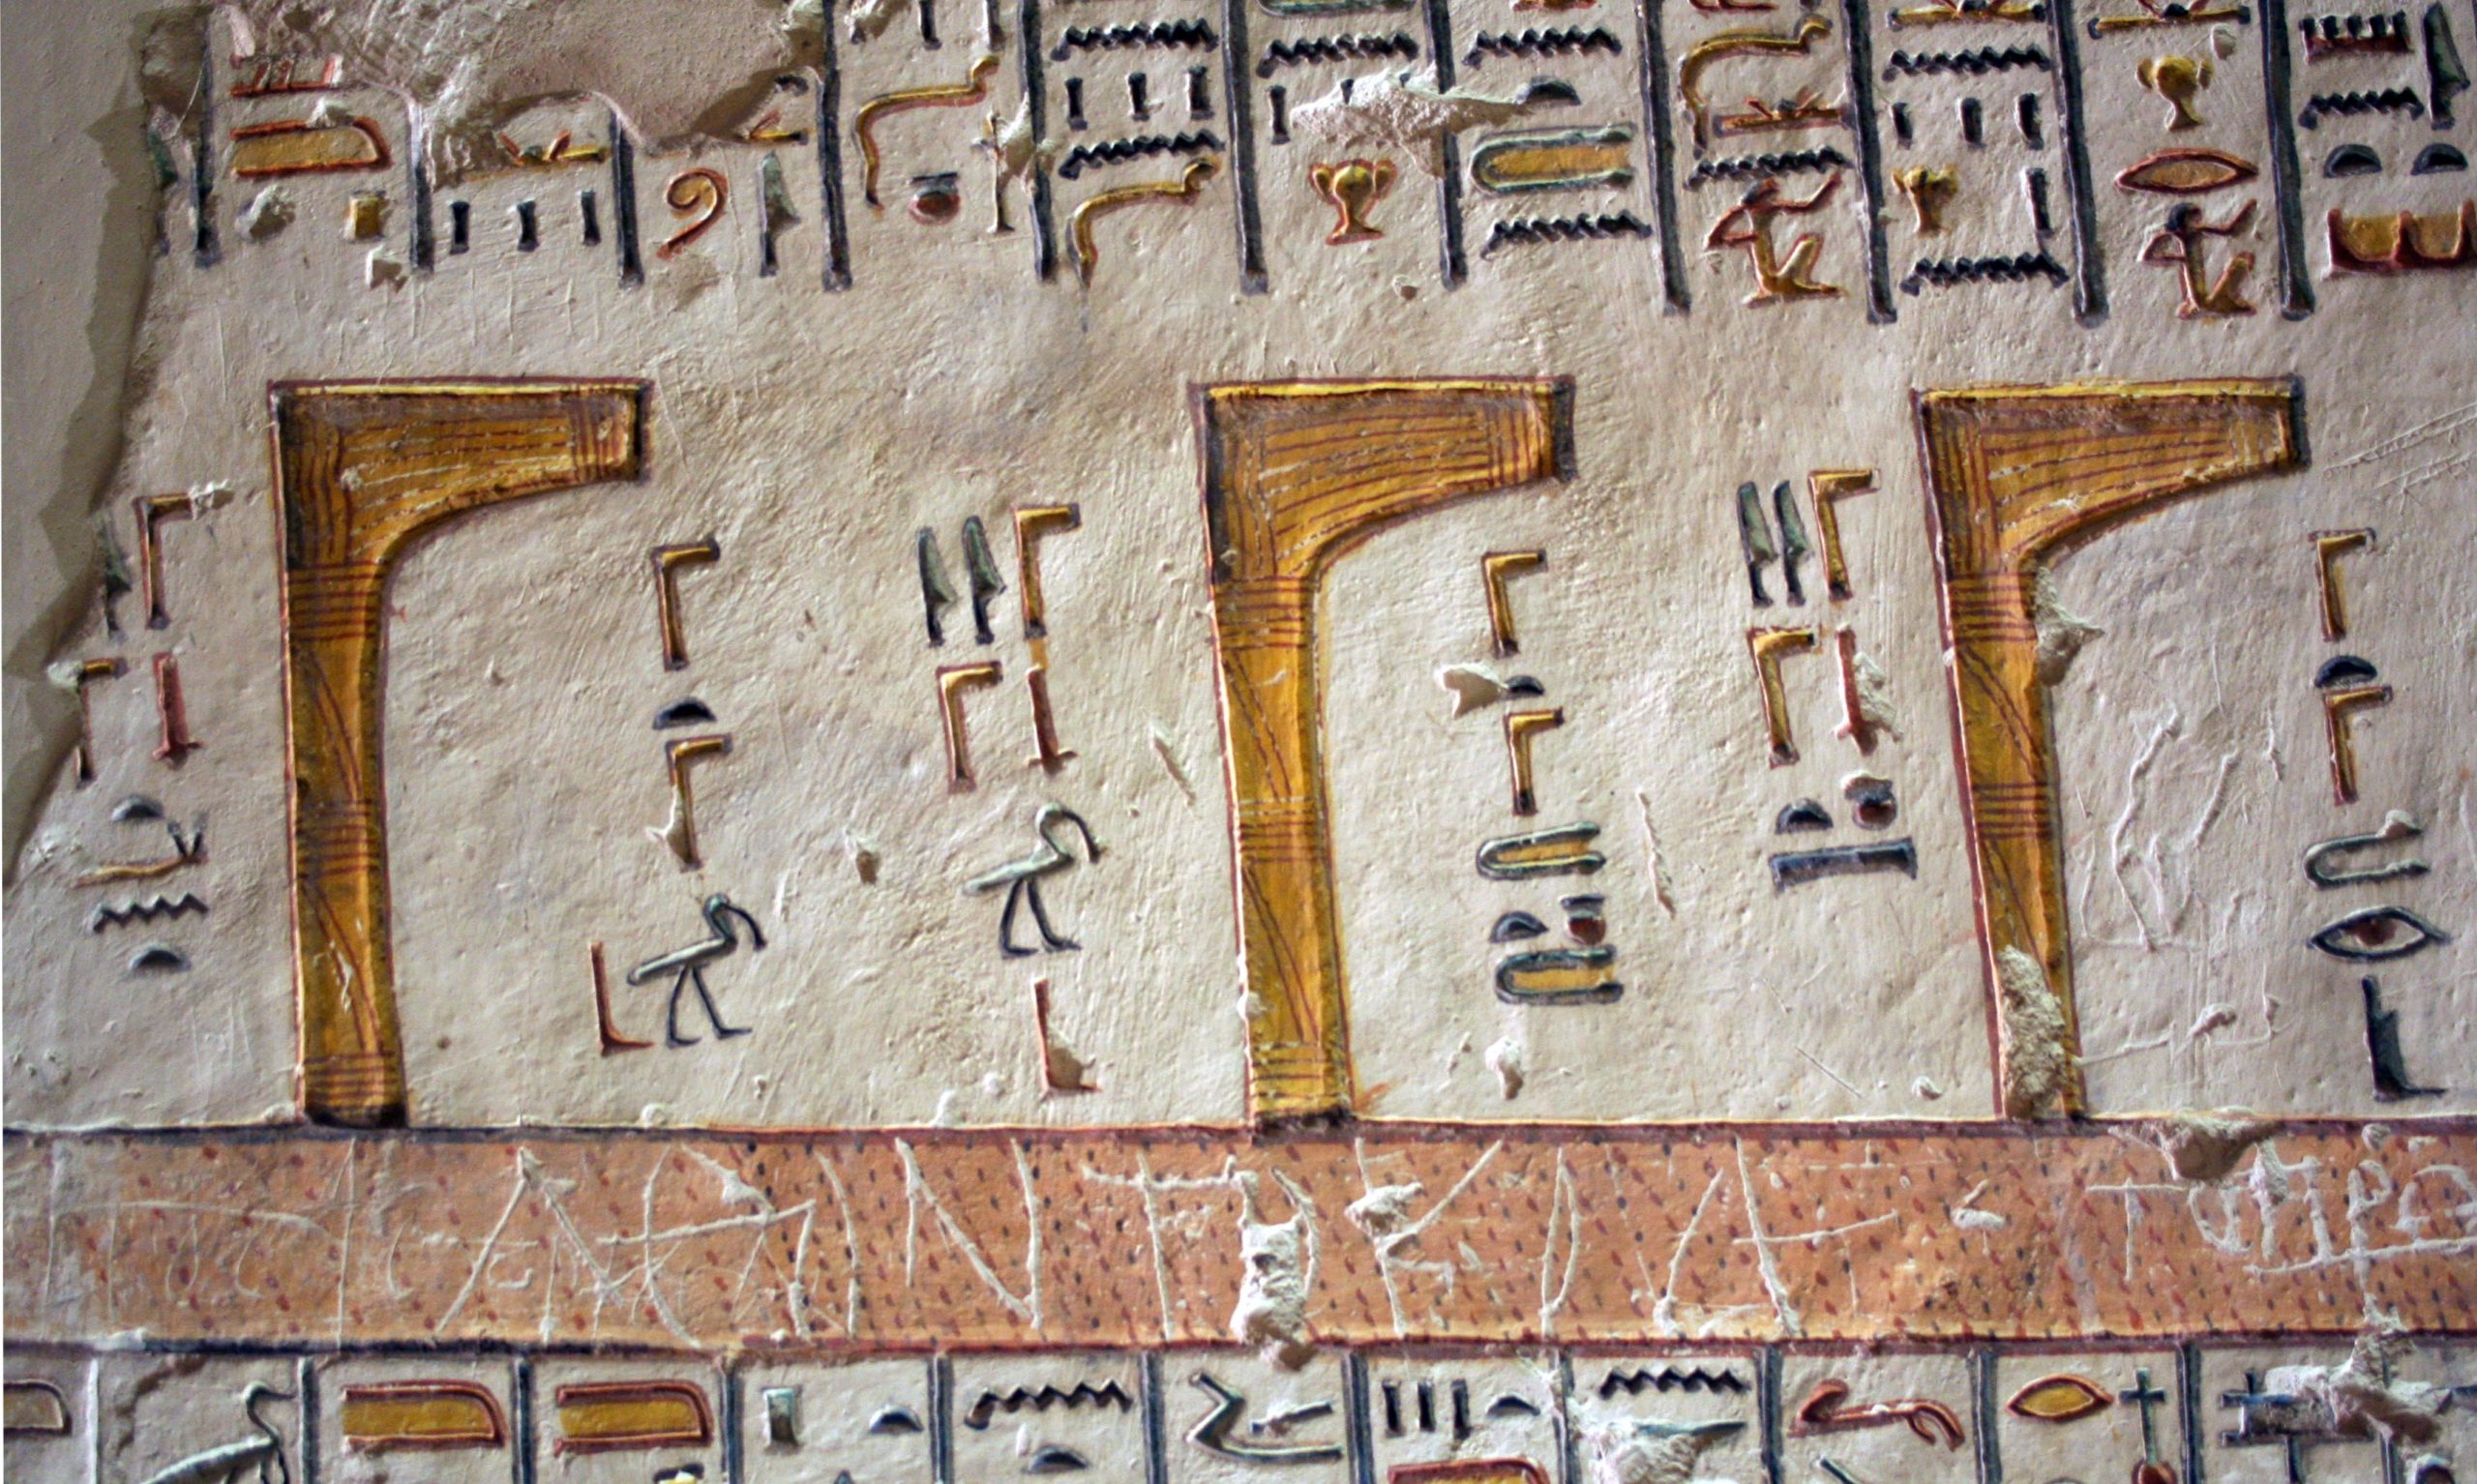 » Creation myths and form(s) of the gods in ancient Egypt